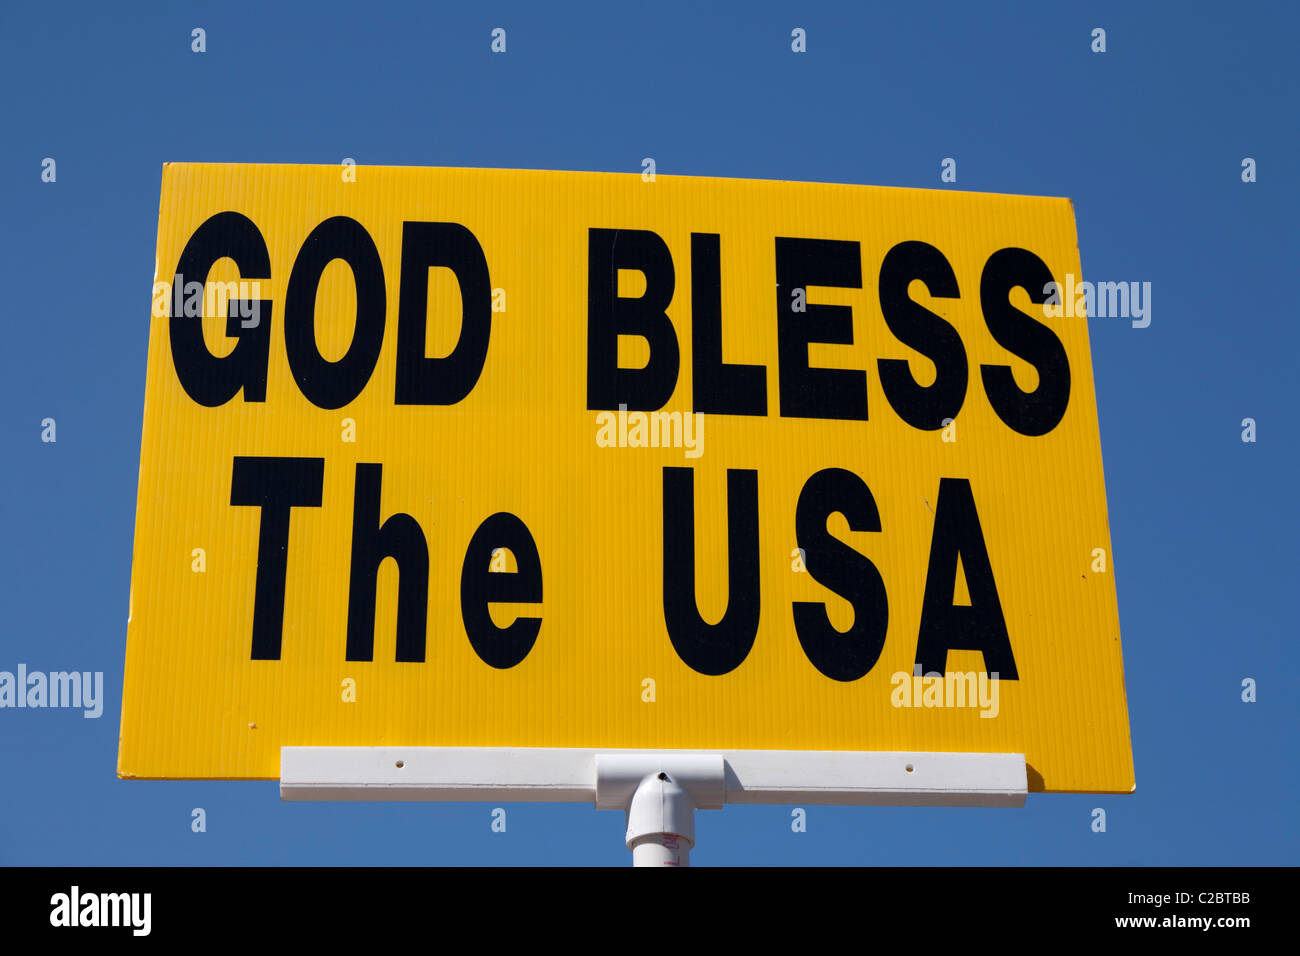 God Bless the USA sign on a yellow background against a blue sky. Stock Photo